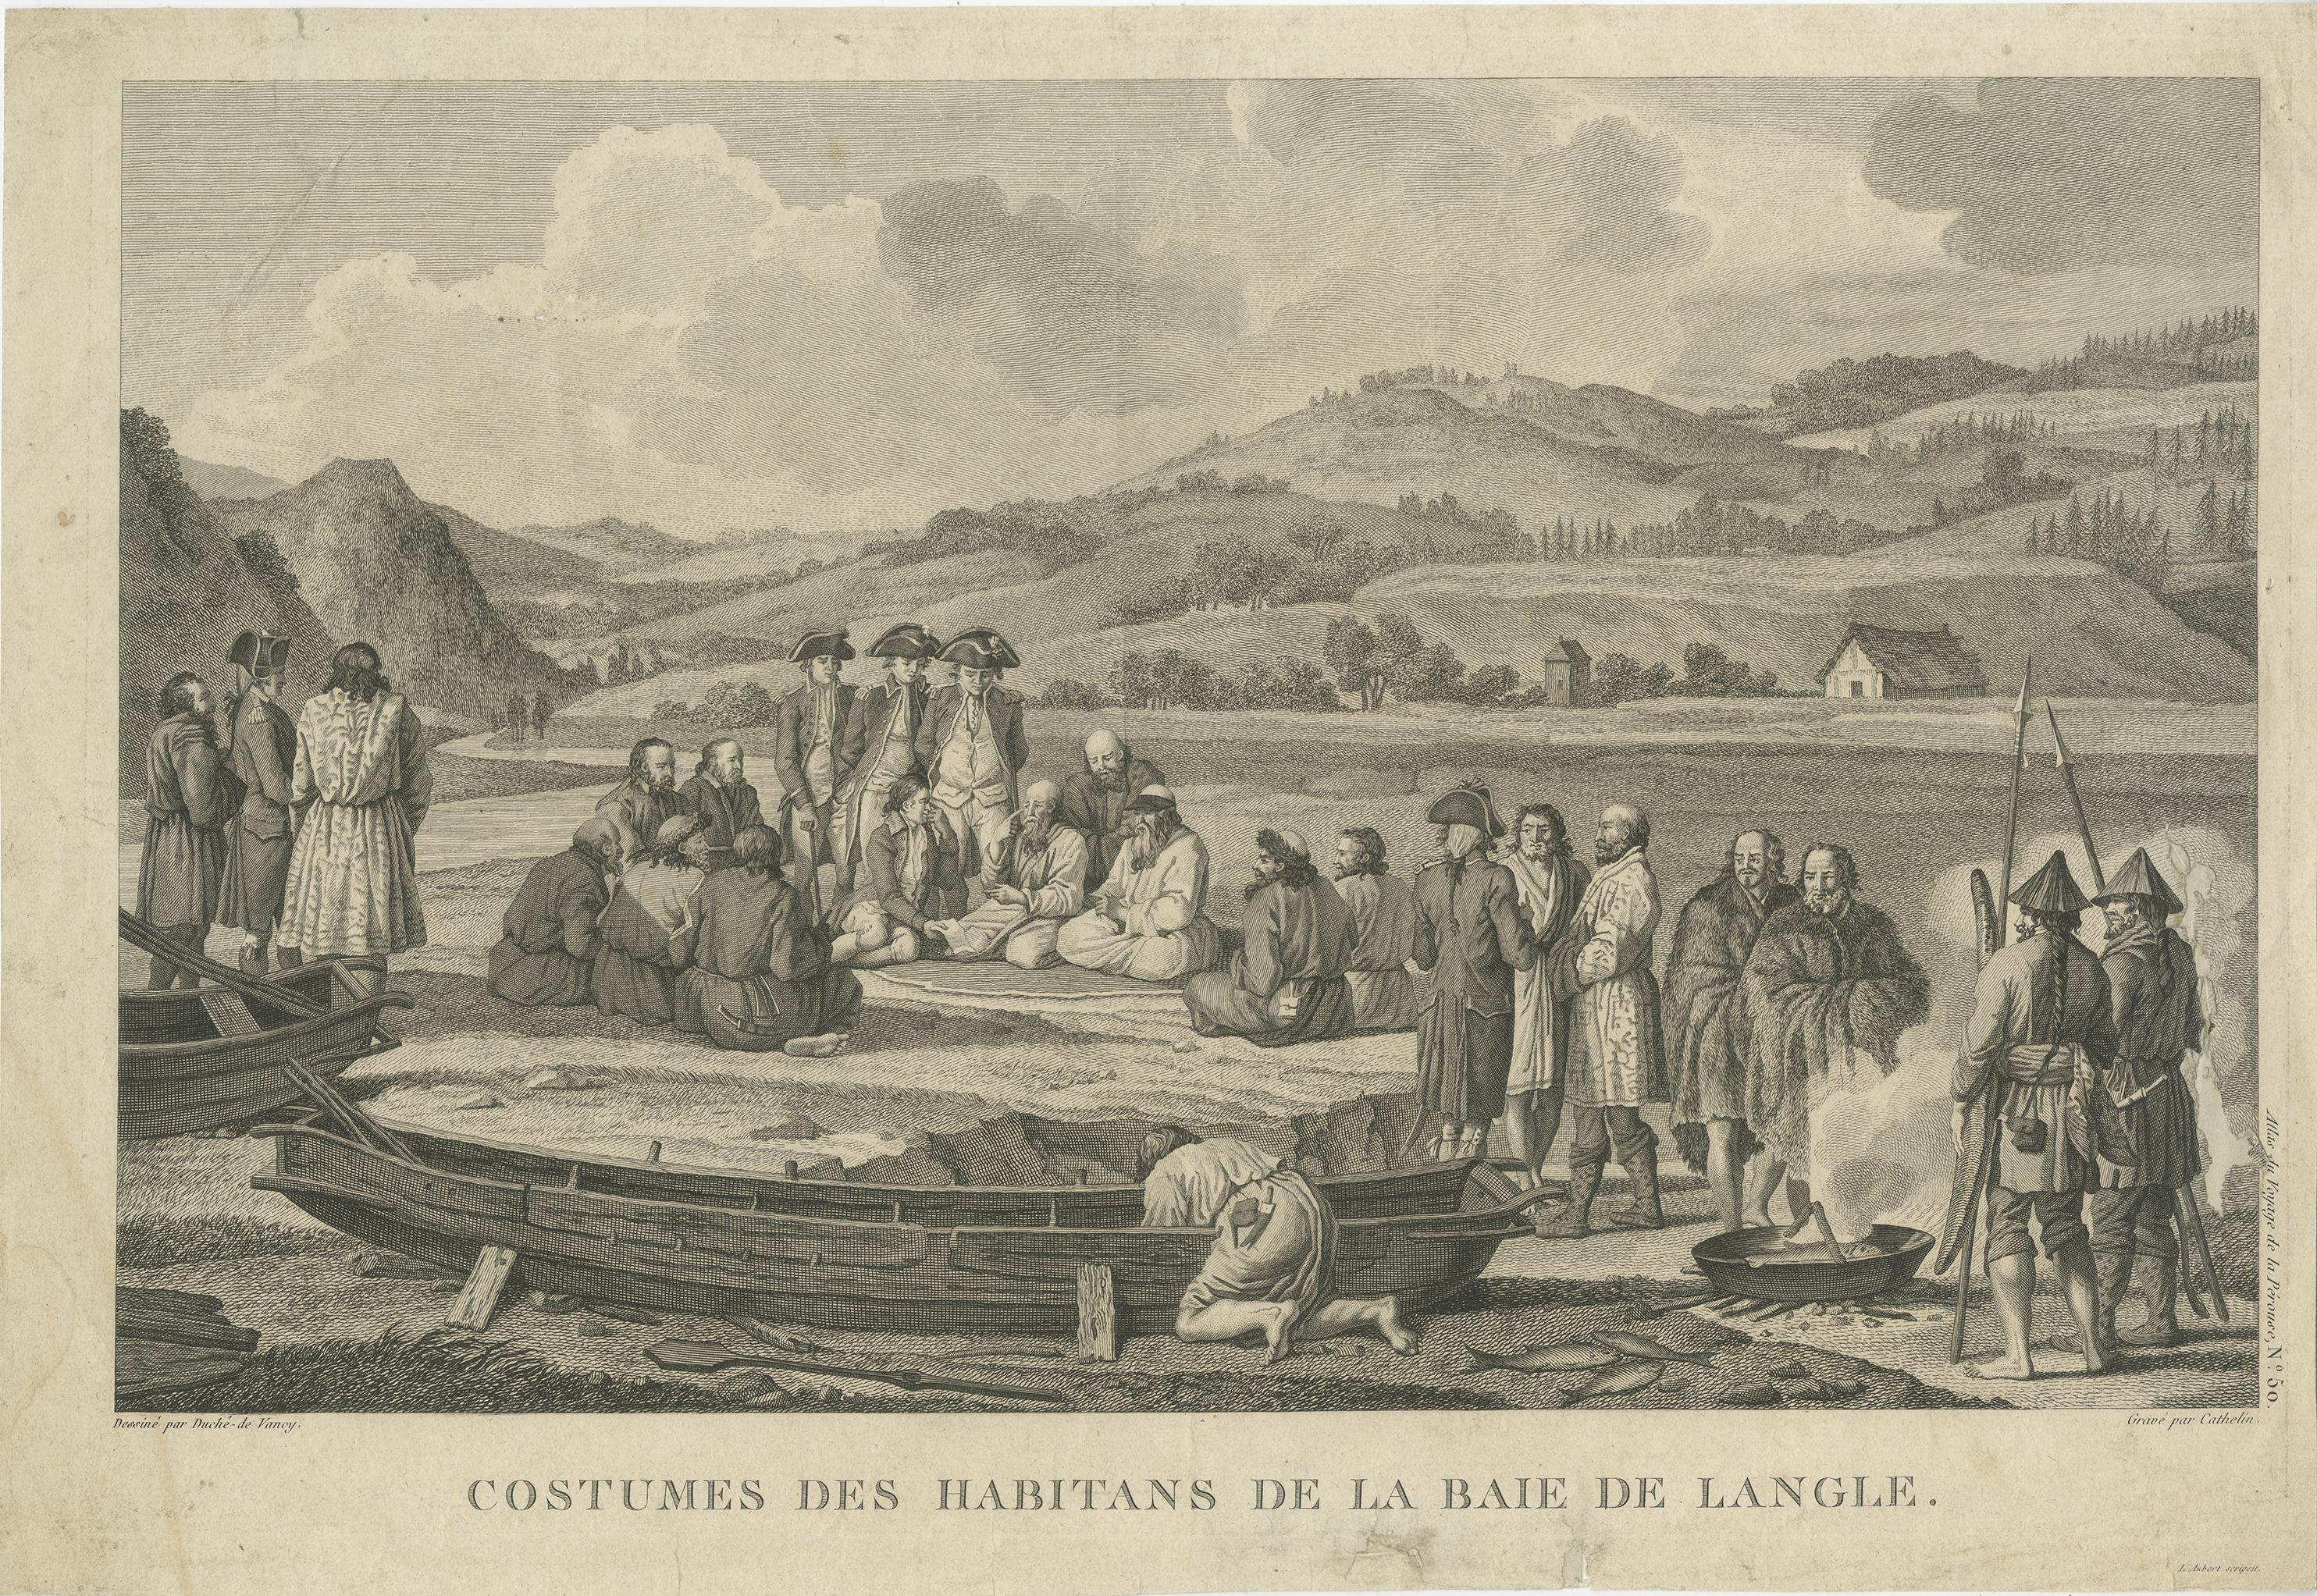 Plate: 'Costumes des Habitants de la Baie de Langle.' (Costumes of the inhabitants of Langle Bay, Russia). 

Tomari (Russian: ??????) is a coastal town and the administrative center of Tomarinsky District in Sakhalin Oblast, Russia, located on the